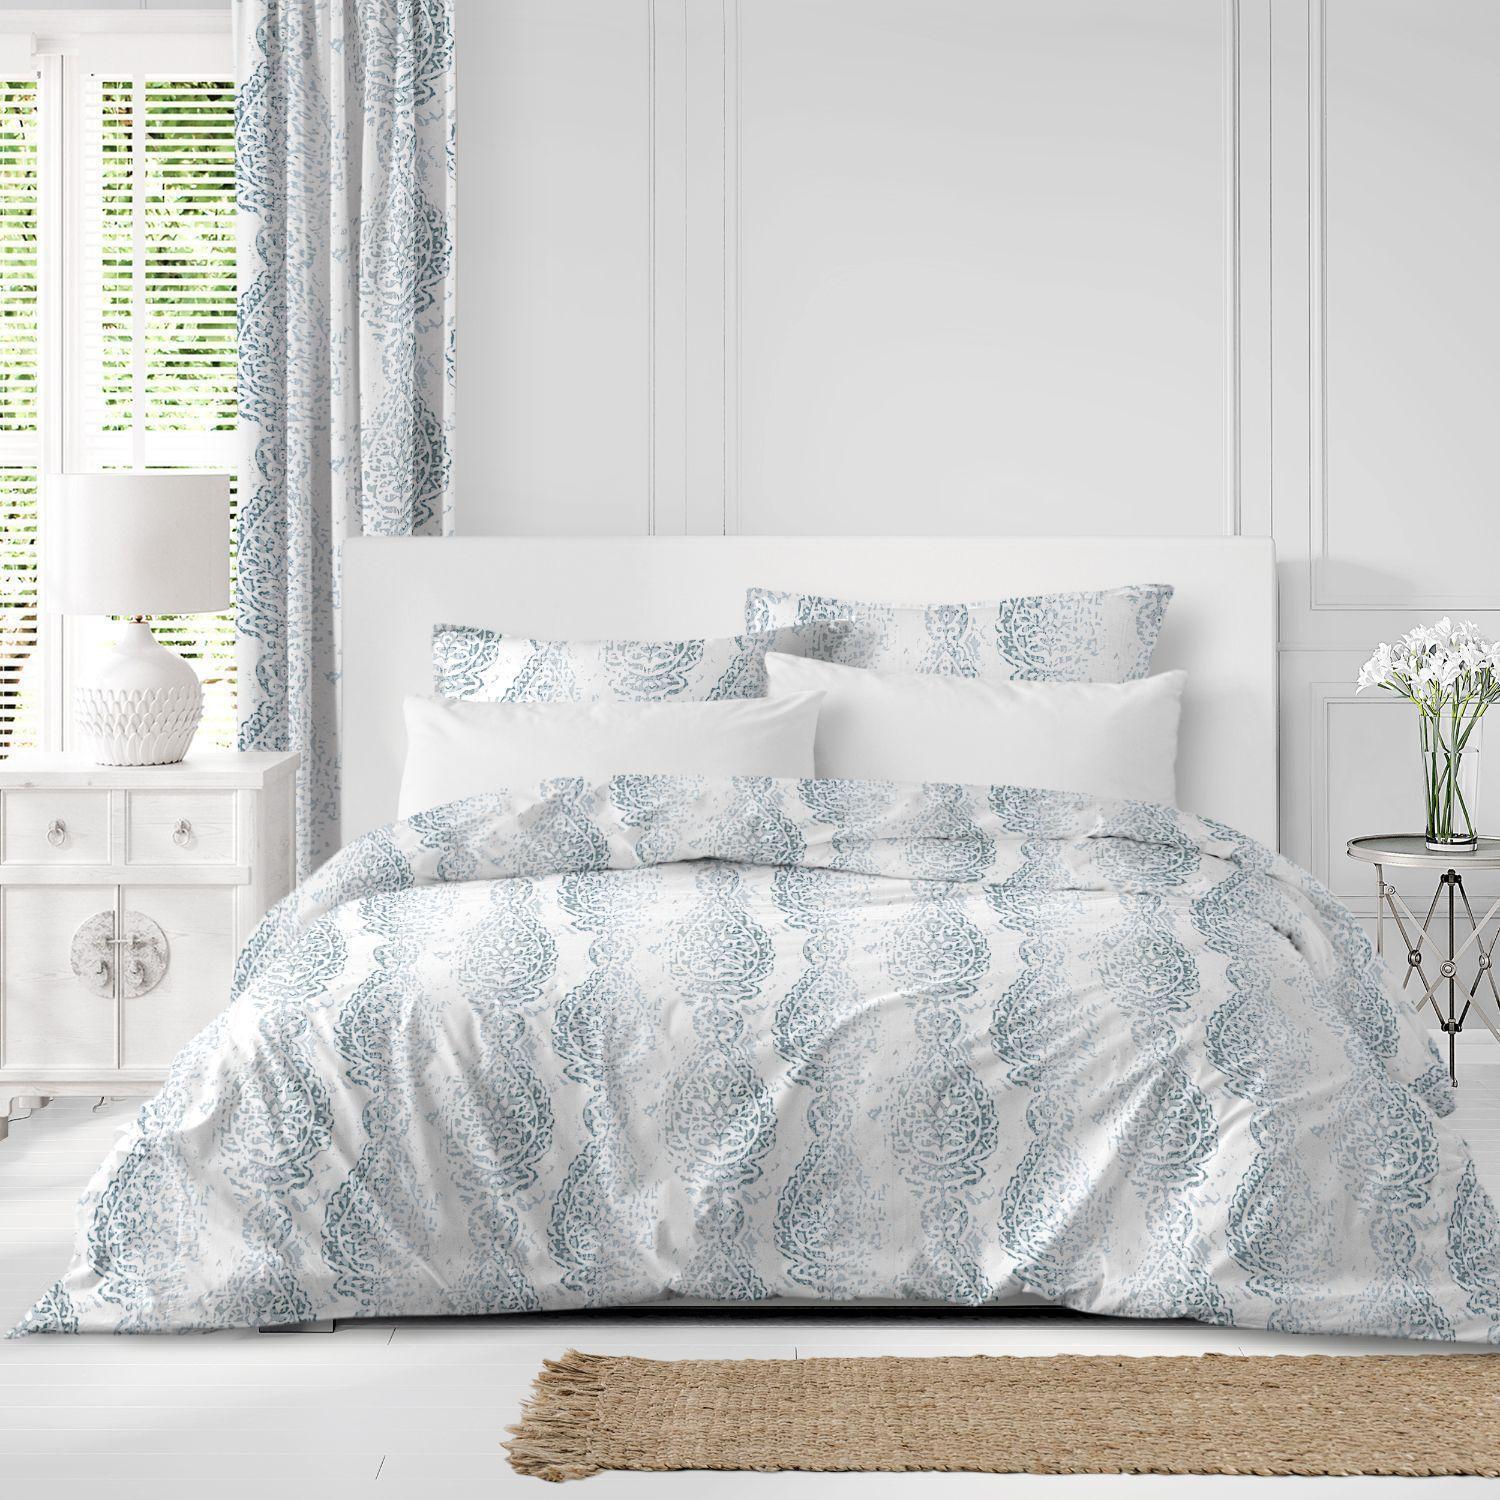 Set of 3 White and Blue Distressed Paisley Comforter with Pillow Shams - Queen alternate image